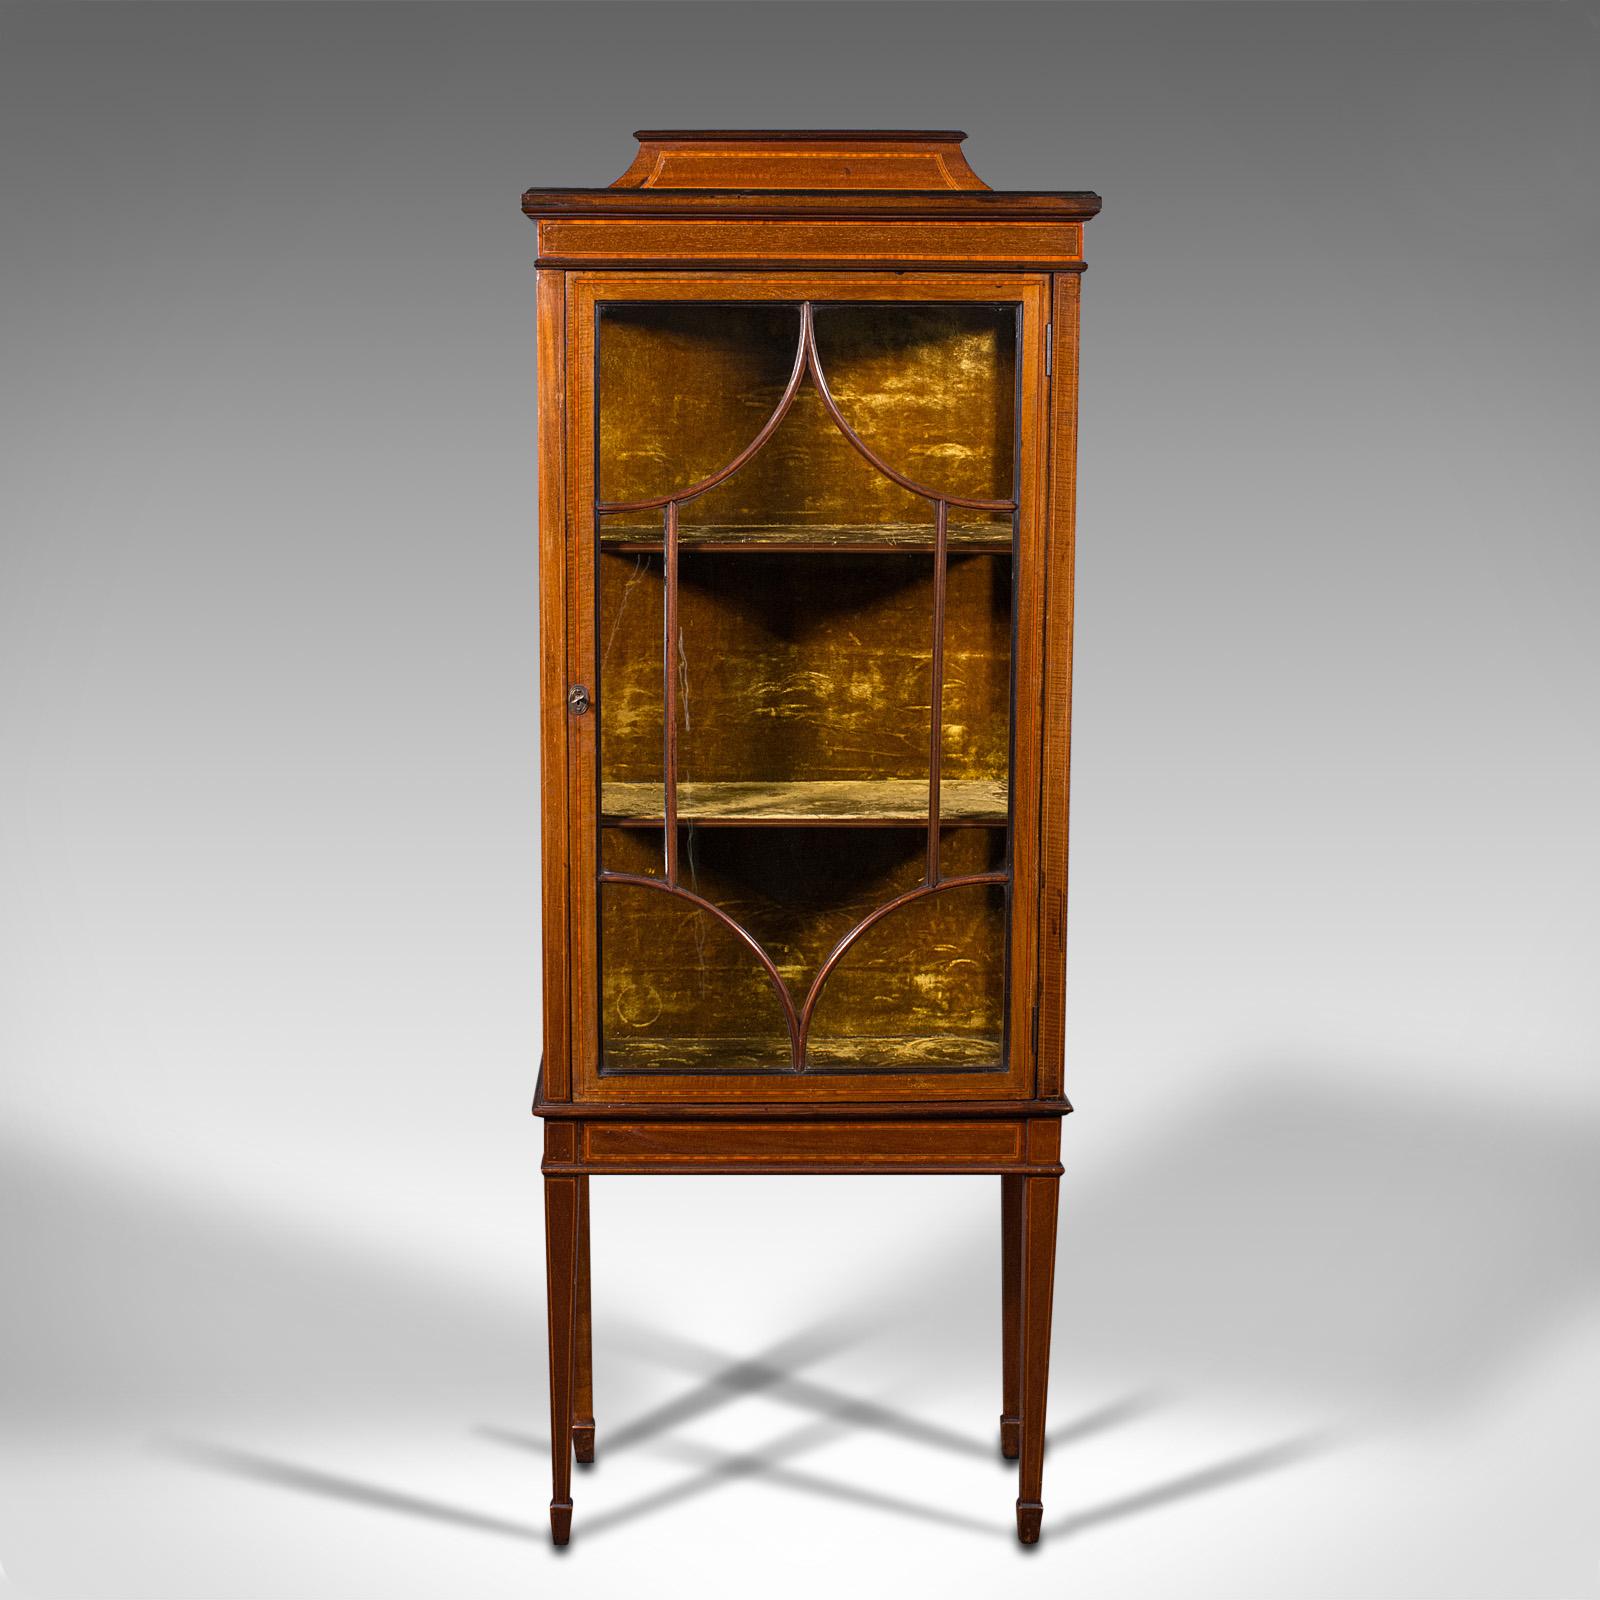 This is an antique pier cabinet on stand. An English, walnut and boxwood glazed display case, dating to the Edwardian period, circa 1910.

Attractive presentation and exuding quality
Displays a desirable aged patina and in good order
Select